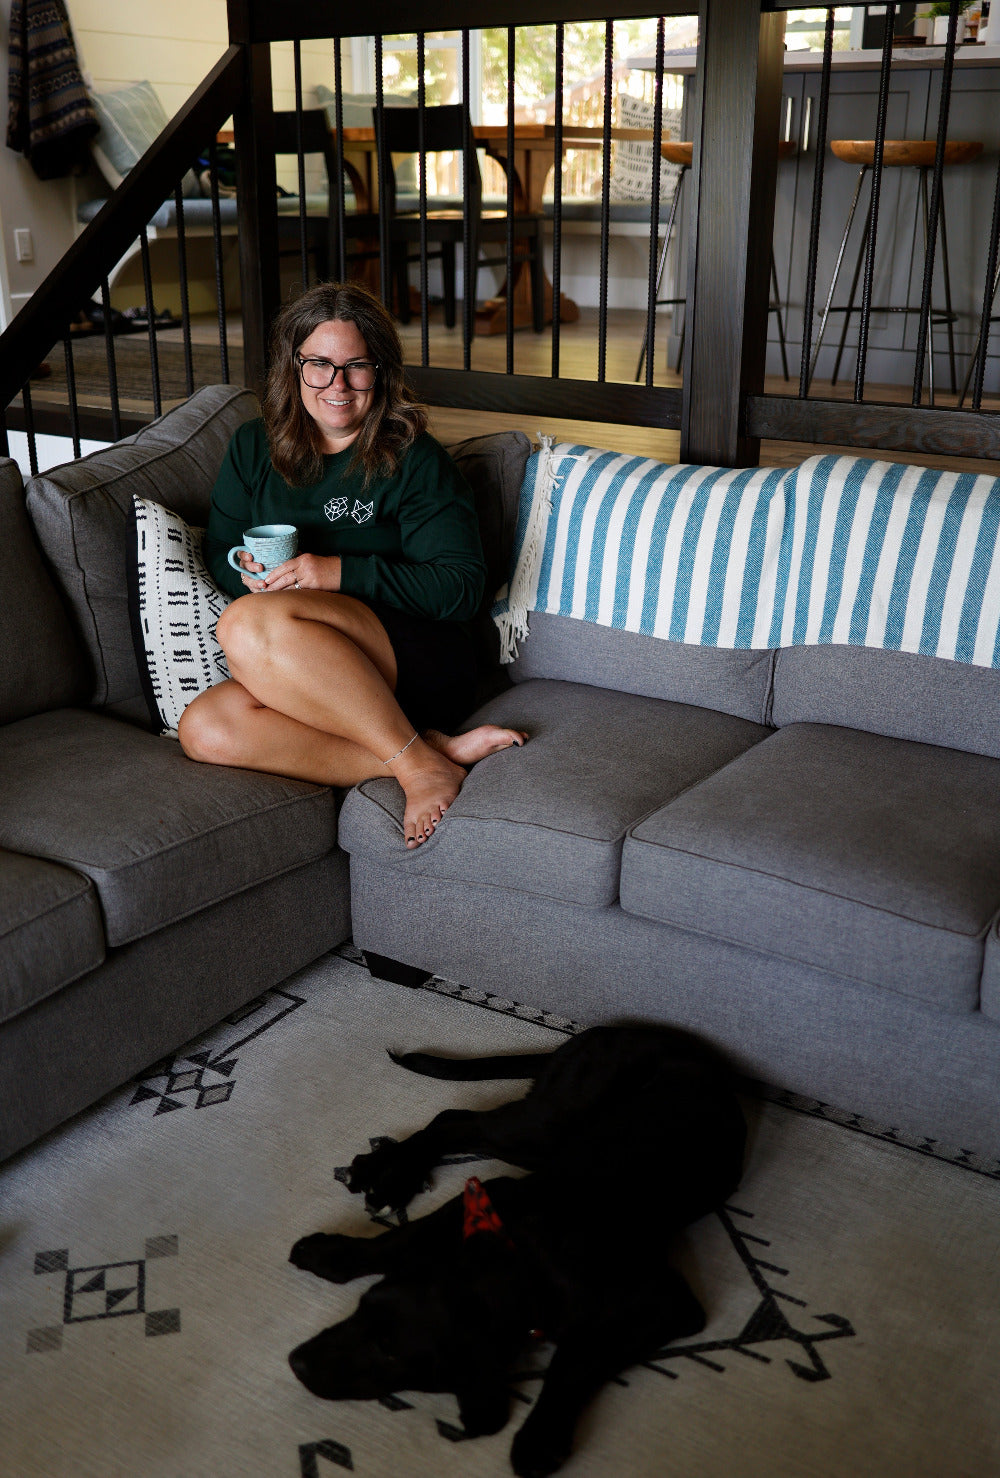 cabin  long sleeve tee on girl drinking kintore coffee at loon lake haus with black lab puppy on floor